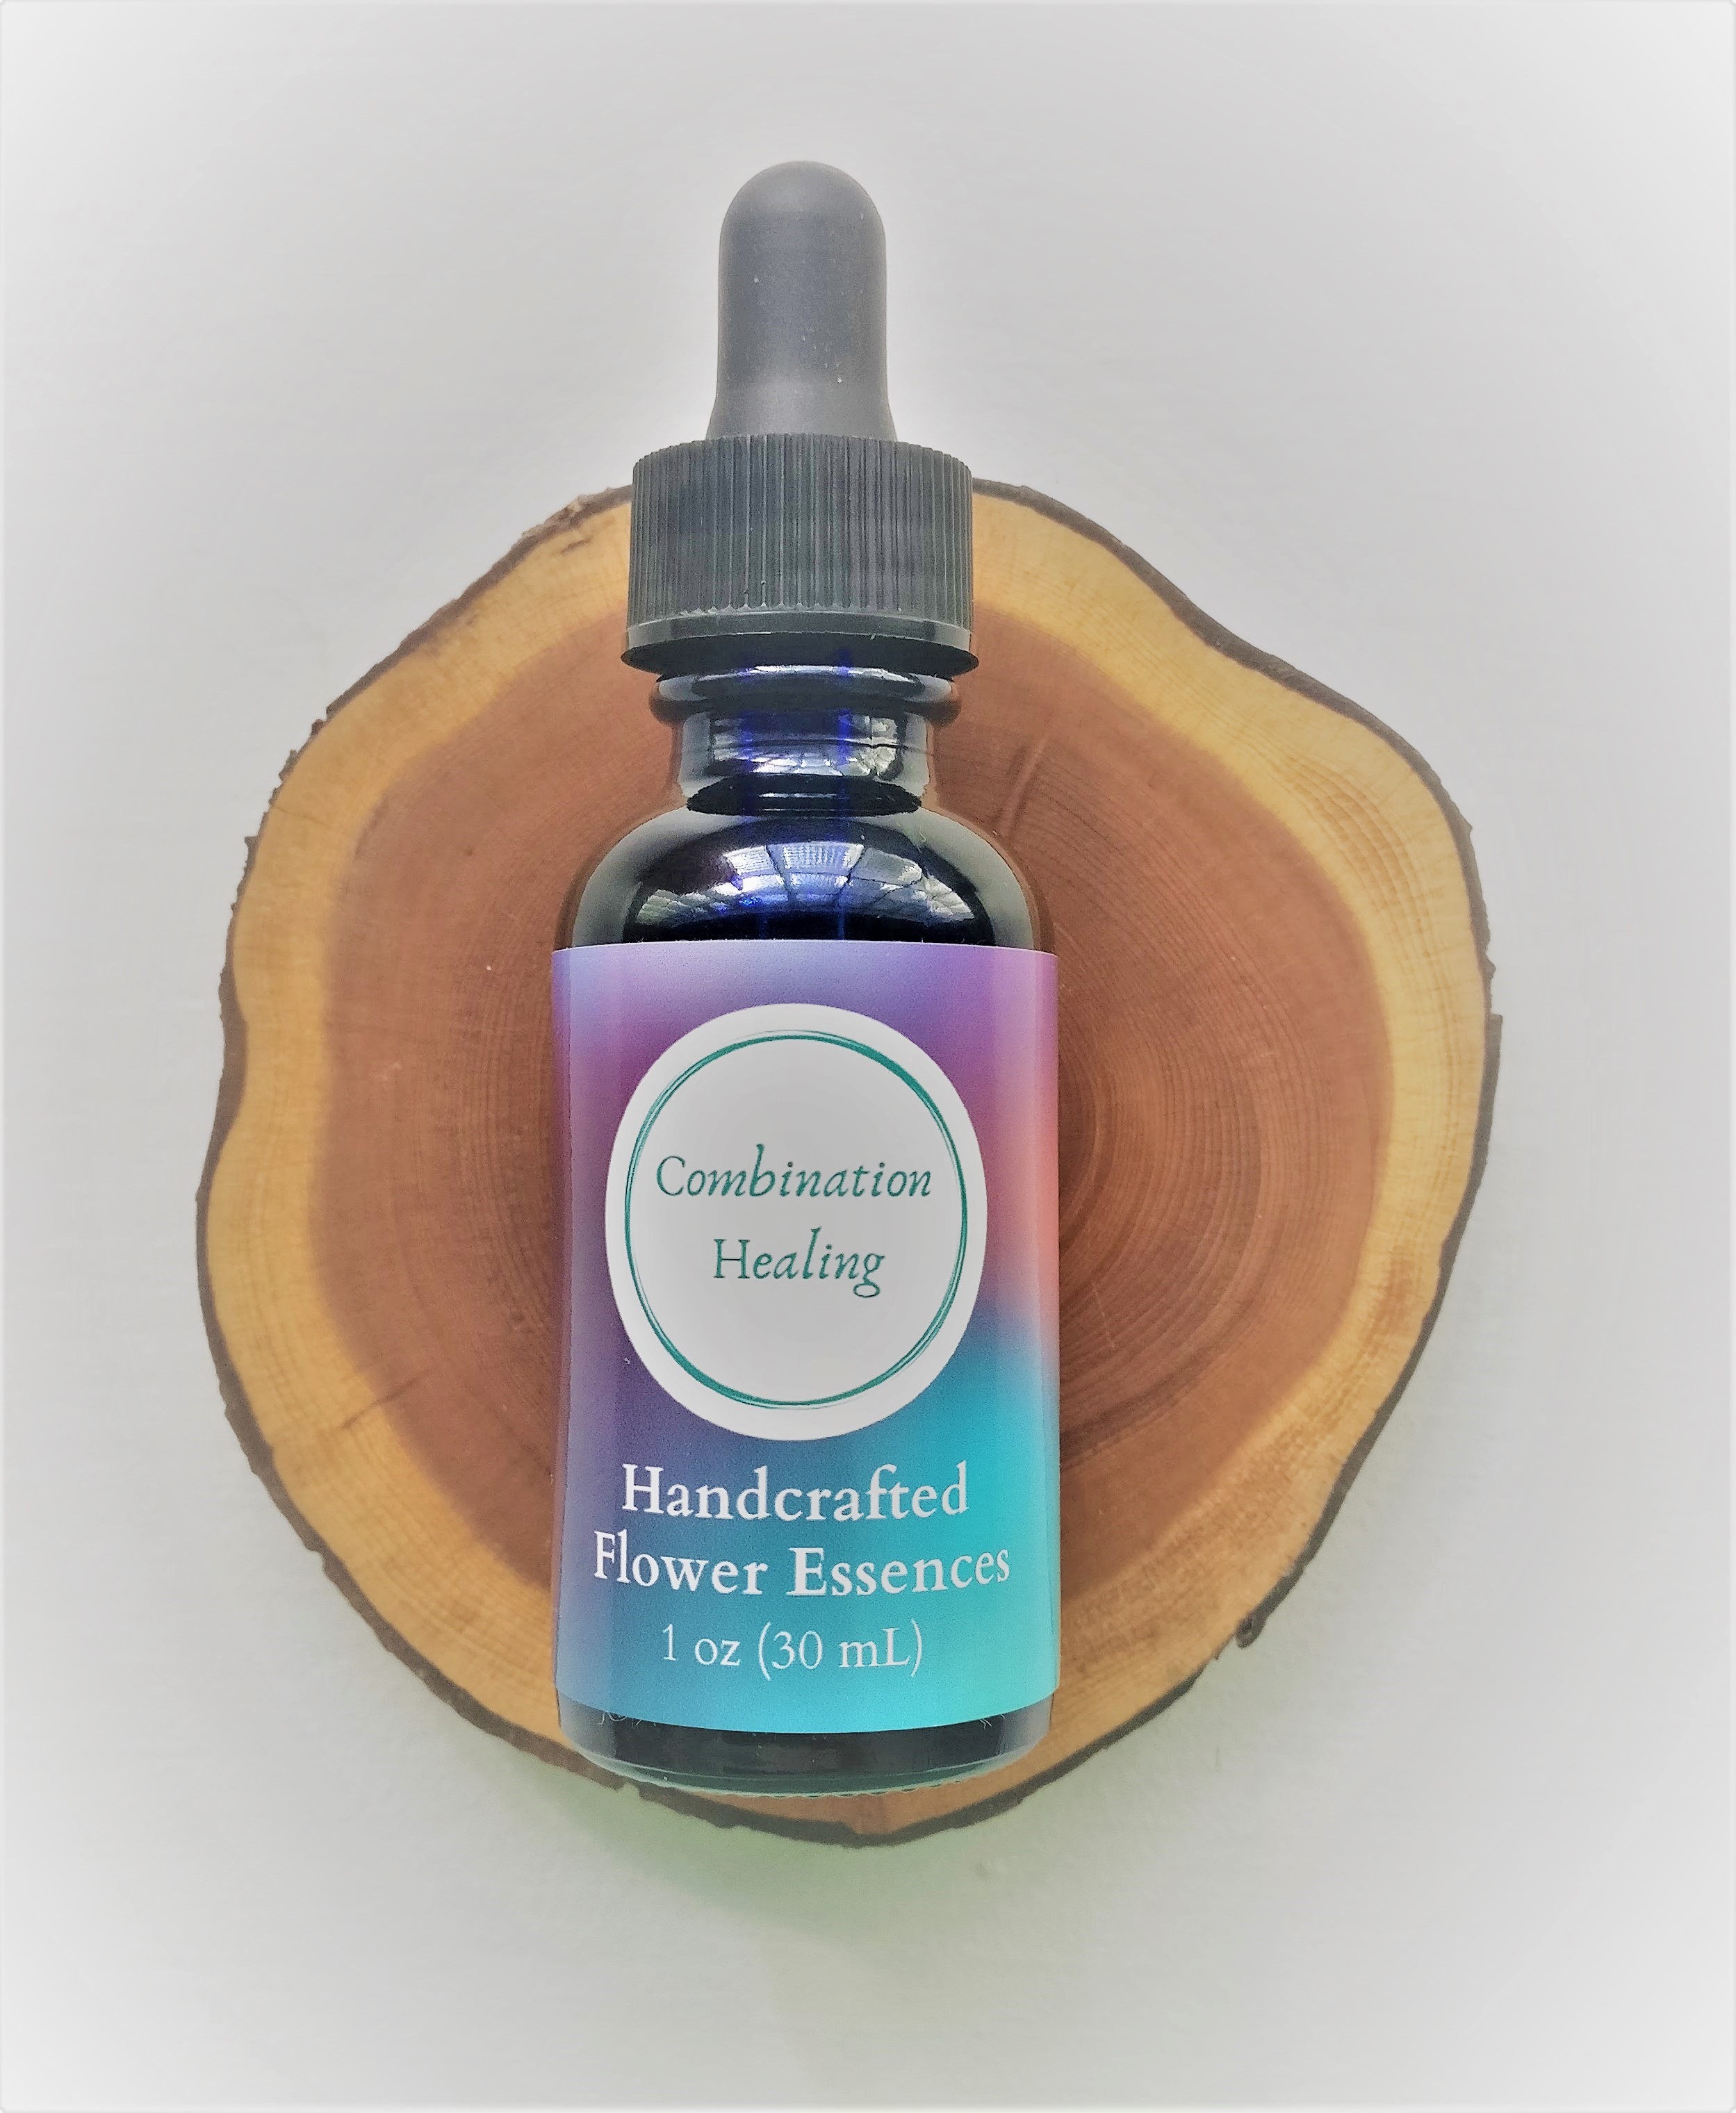 bottle of Combination Healing flower essencs on a round of wood